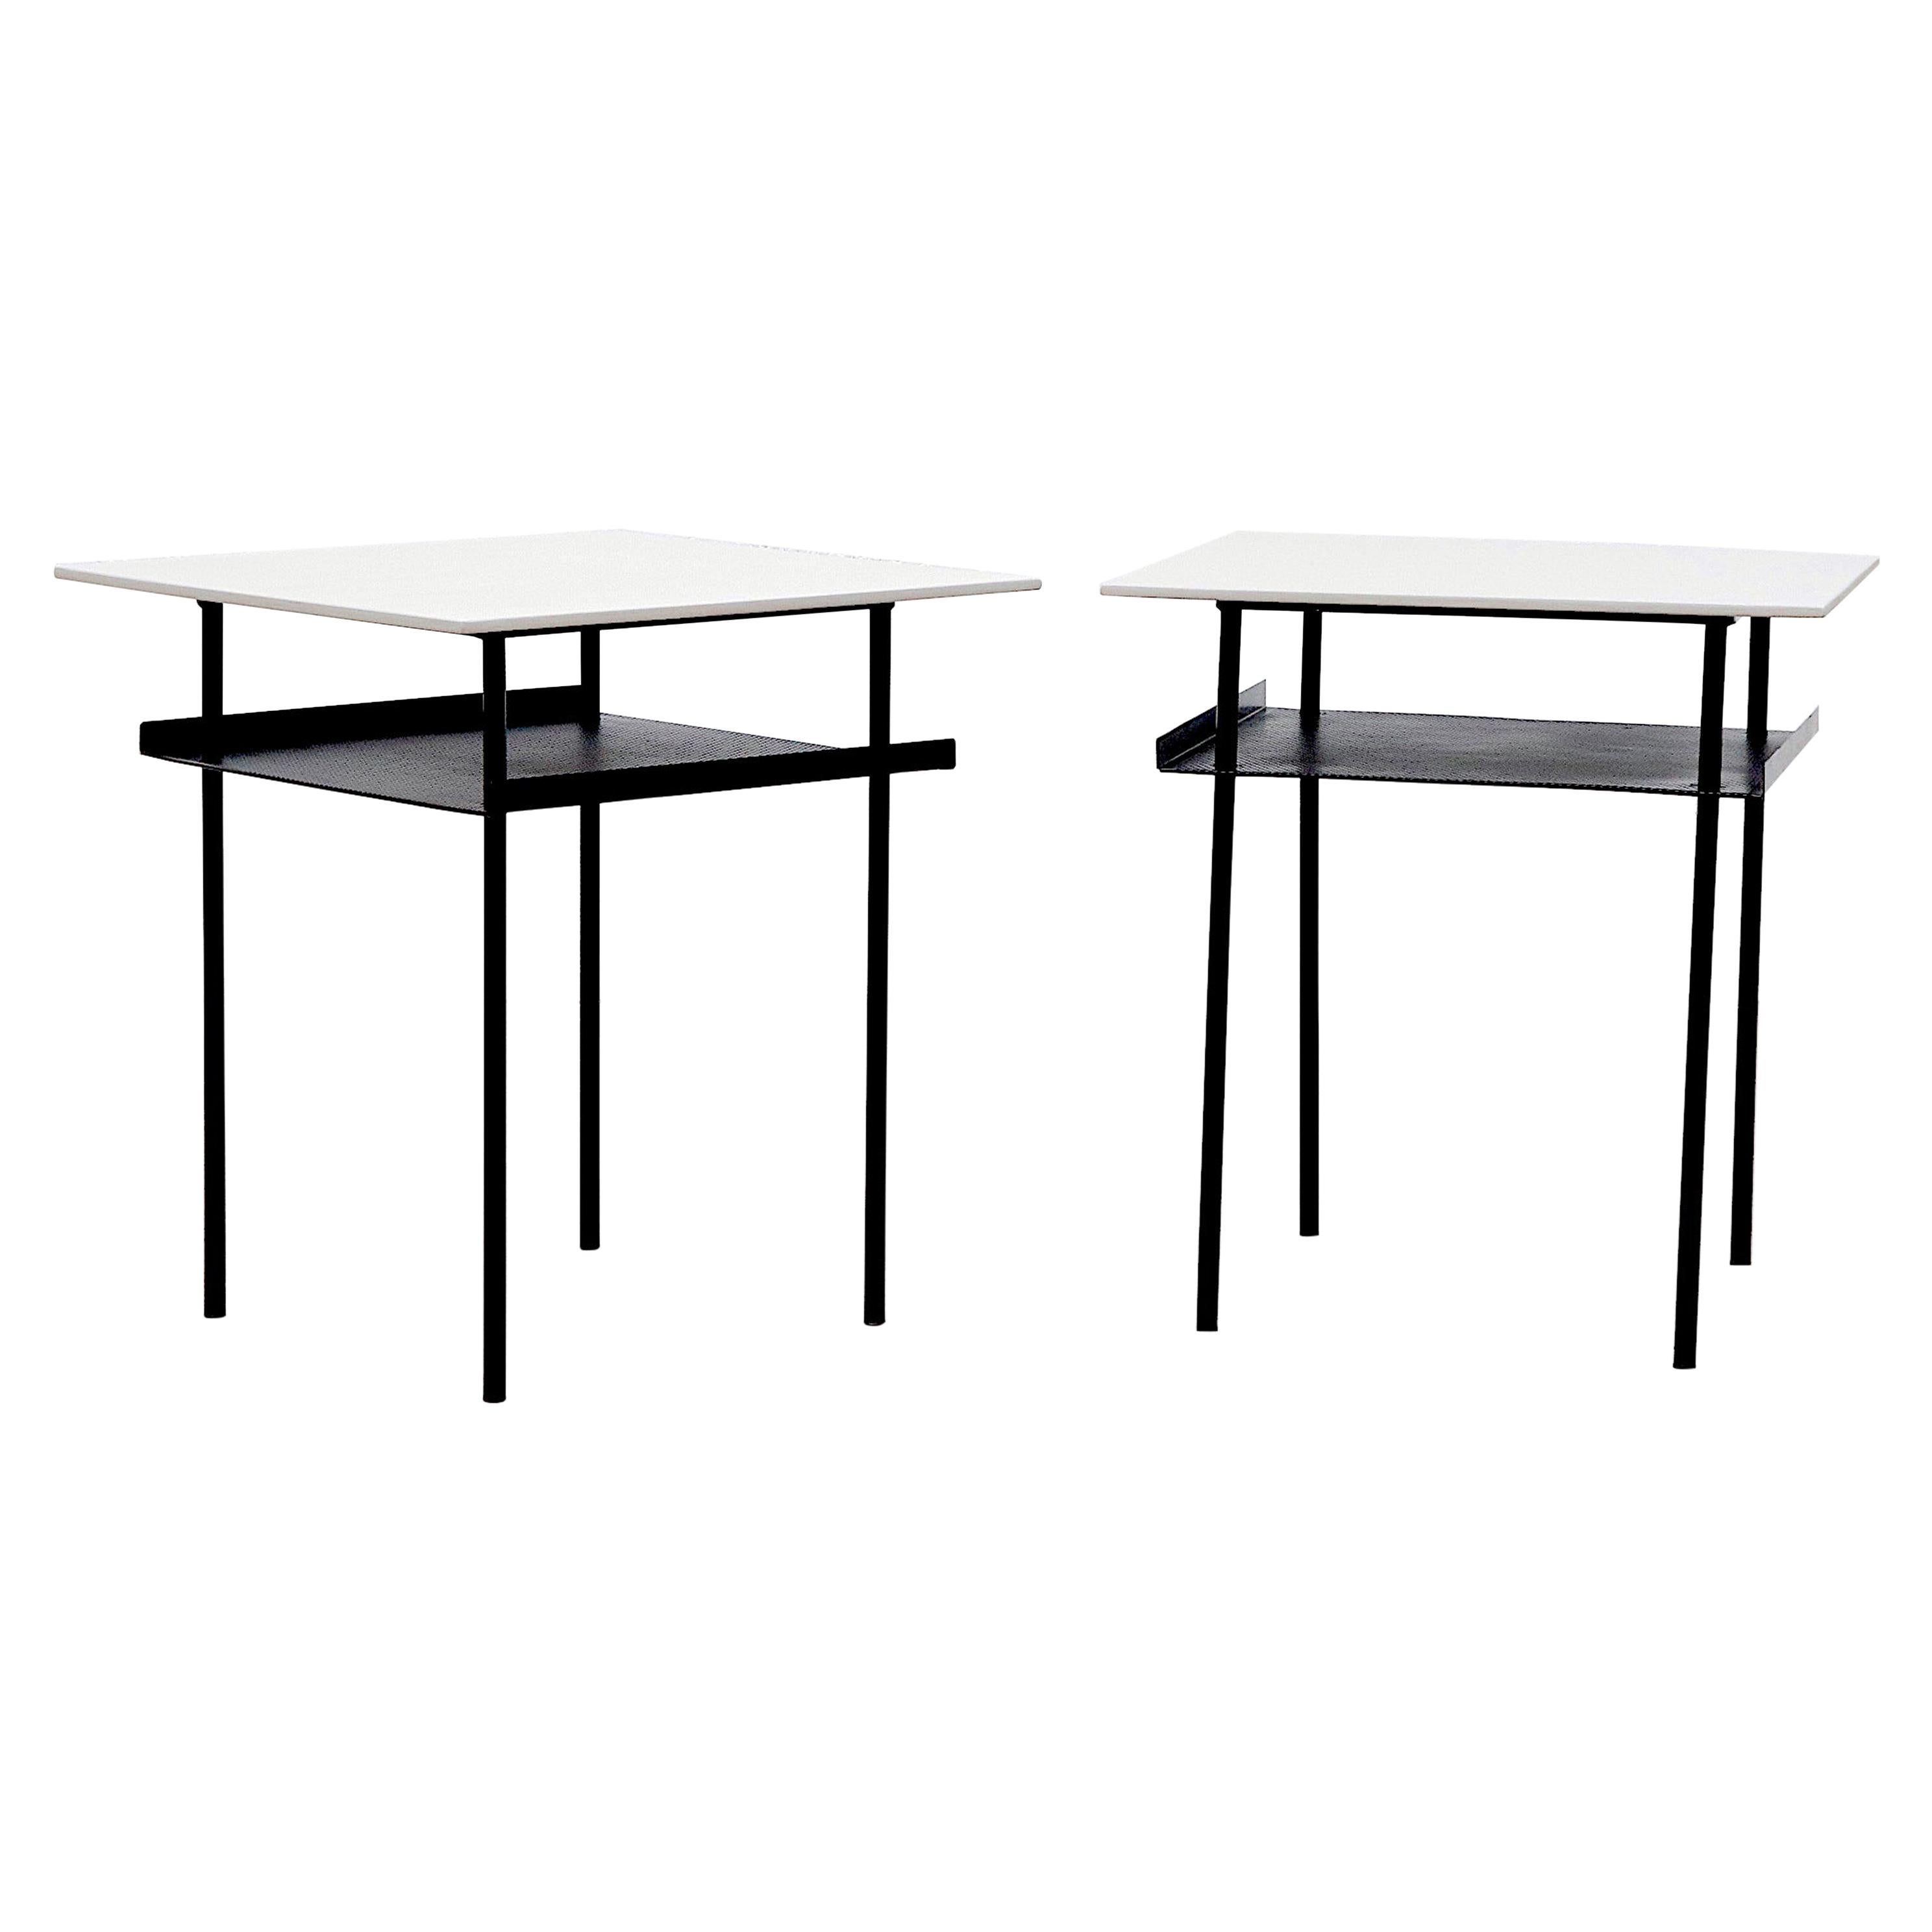 Lightly refinished modernist pair of Wim Rietveld side tables with pale grey painted plywood tops, black enameled metal frames with perforated sheet metal lower shelves with bent-up edges. Tops are painted in pale grey. Set price.